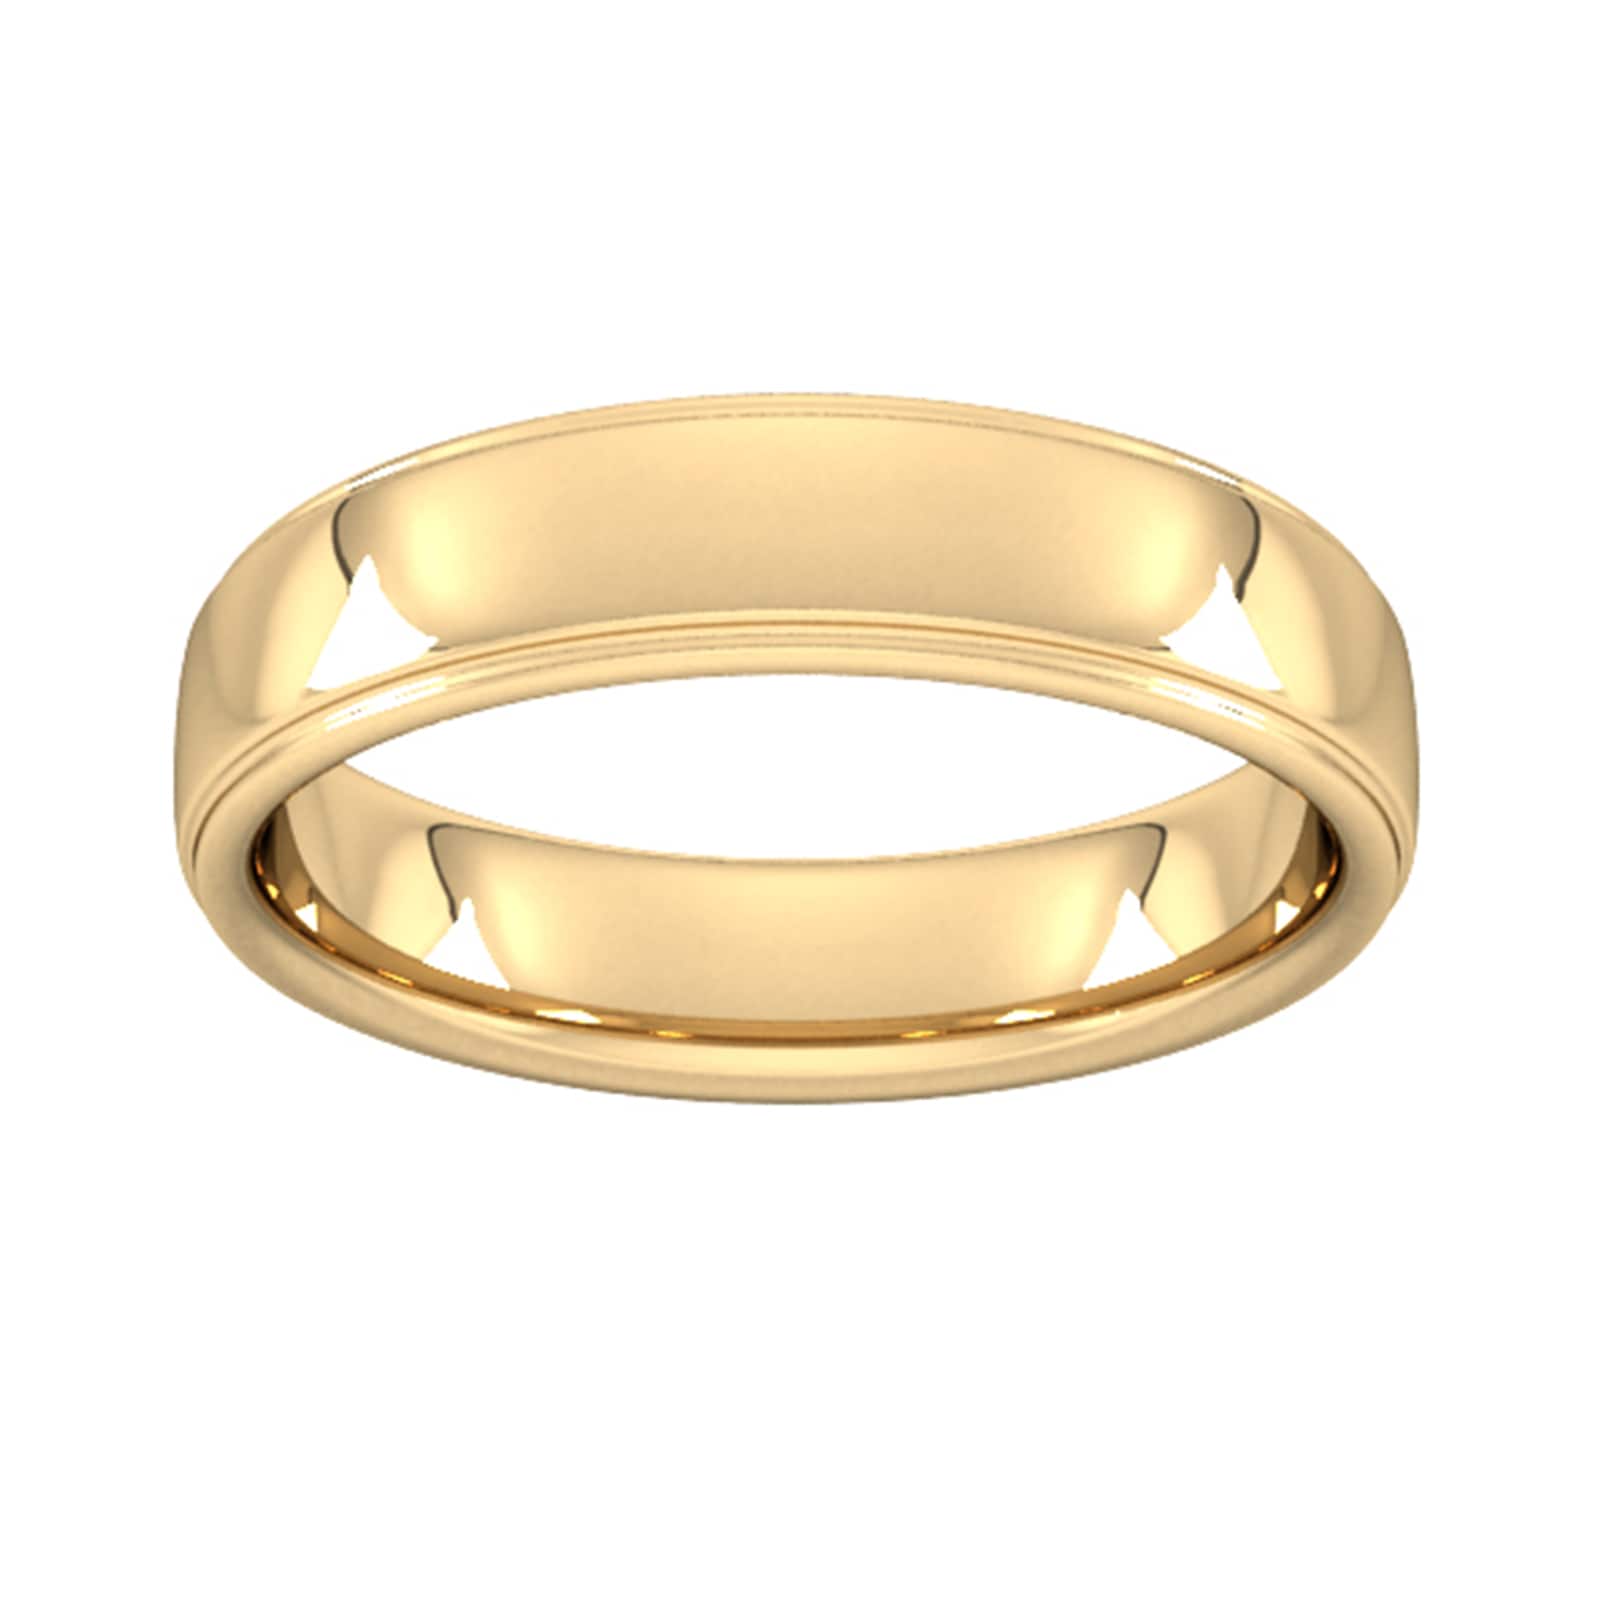 5mm Flat Court Heavy Polished Finish With Grooves Wedding Ring In 18 Carat Yellow Gold - Ring Size W